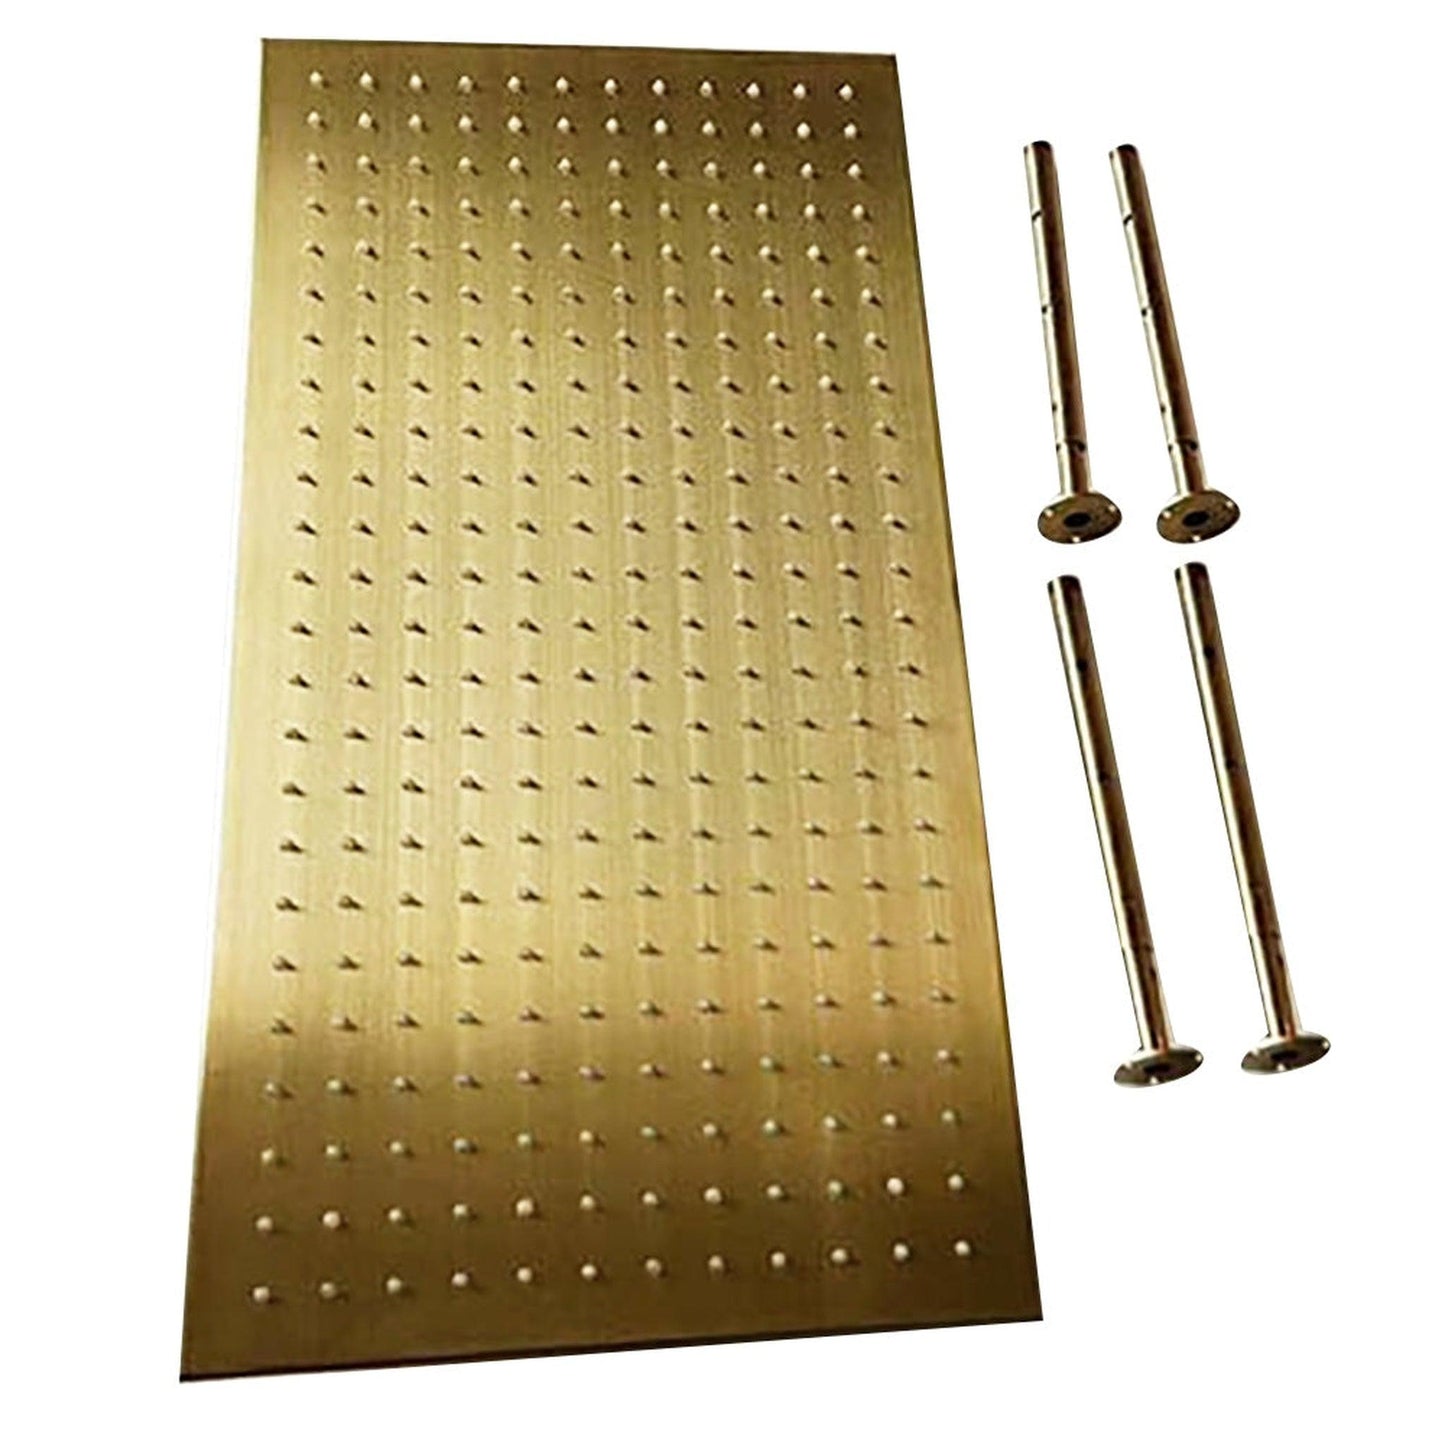 Fontana Martinique Creative Luxury Large Brushed Gold Rectangular Ceiling Mounted LED Solid Brass Shower Head Rain Shower System With 6-Jet Body Sprays and Hand Shower